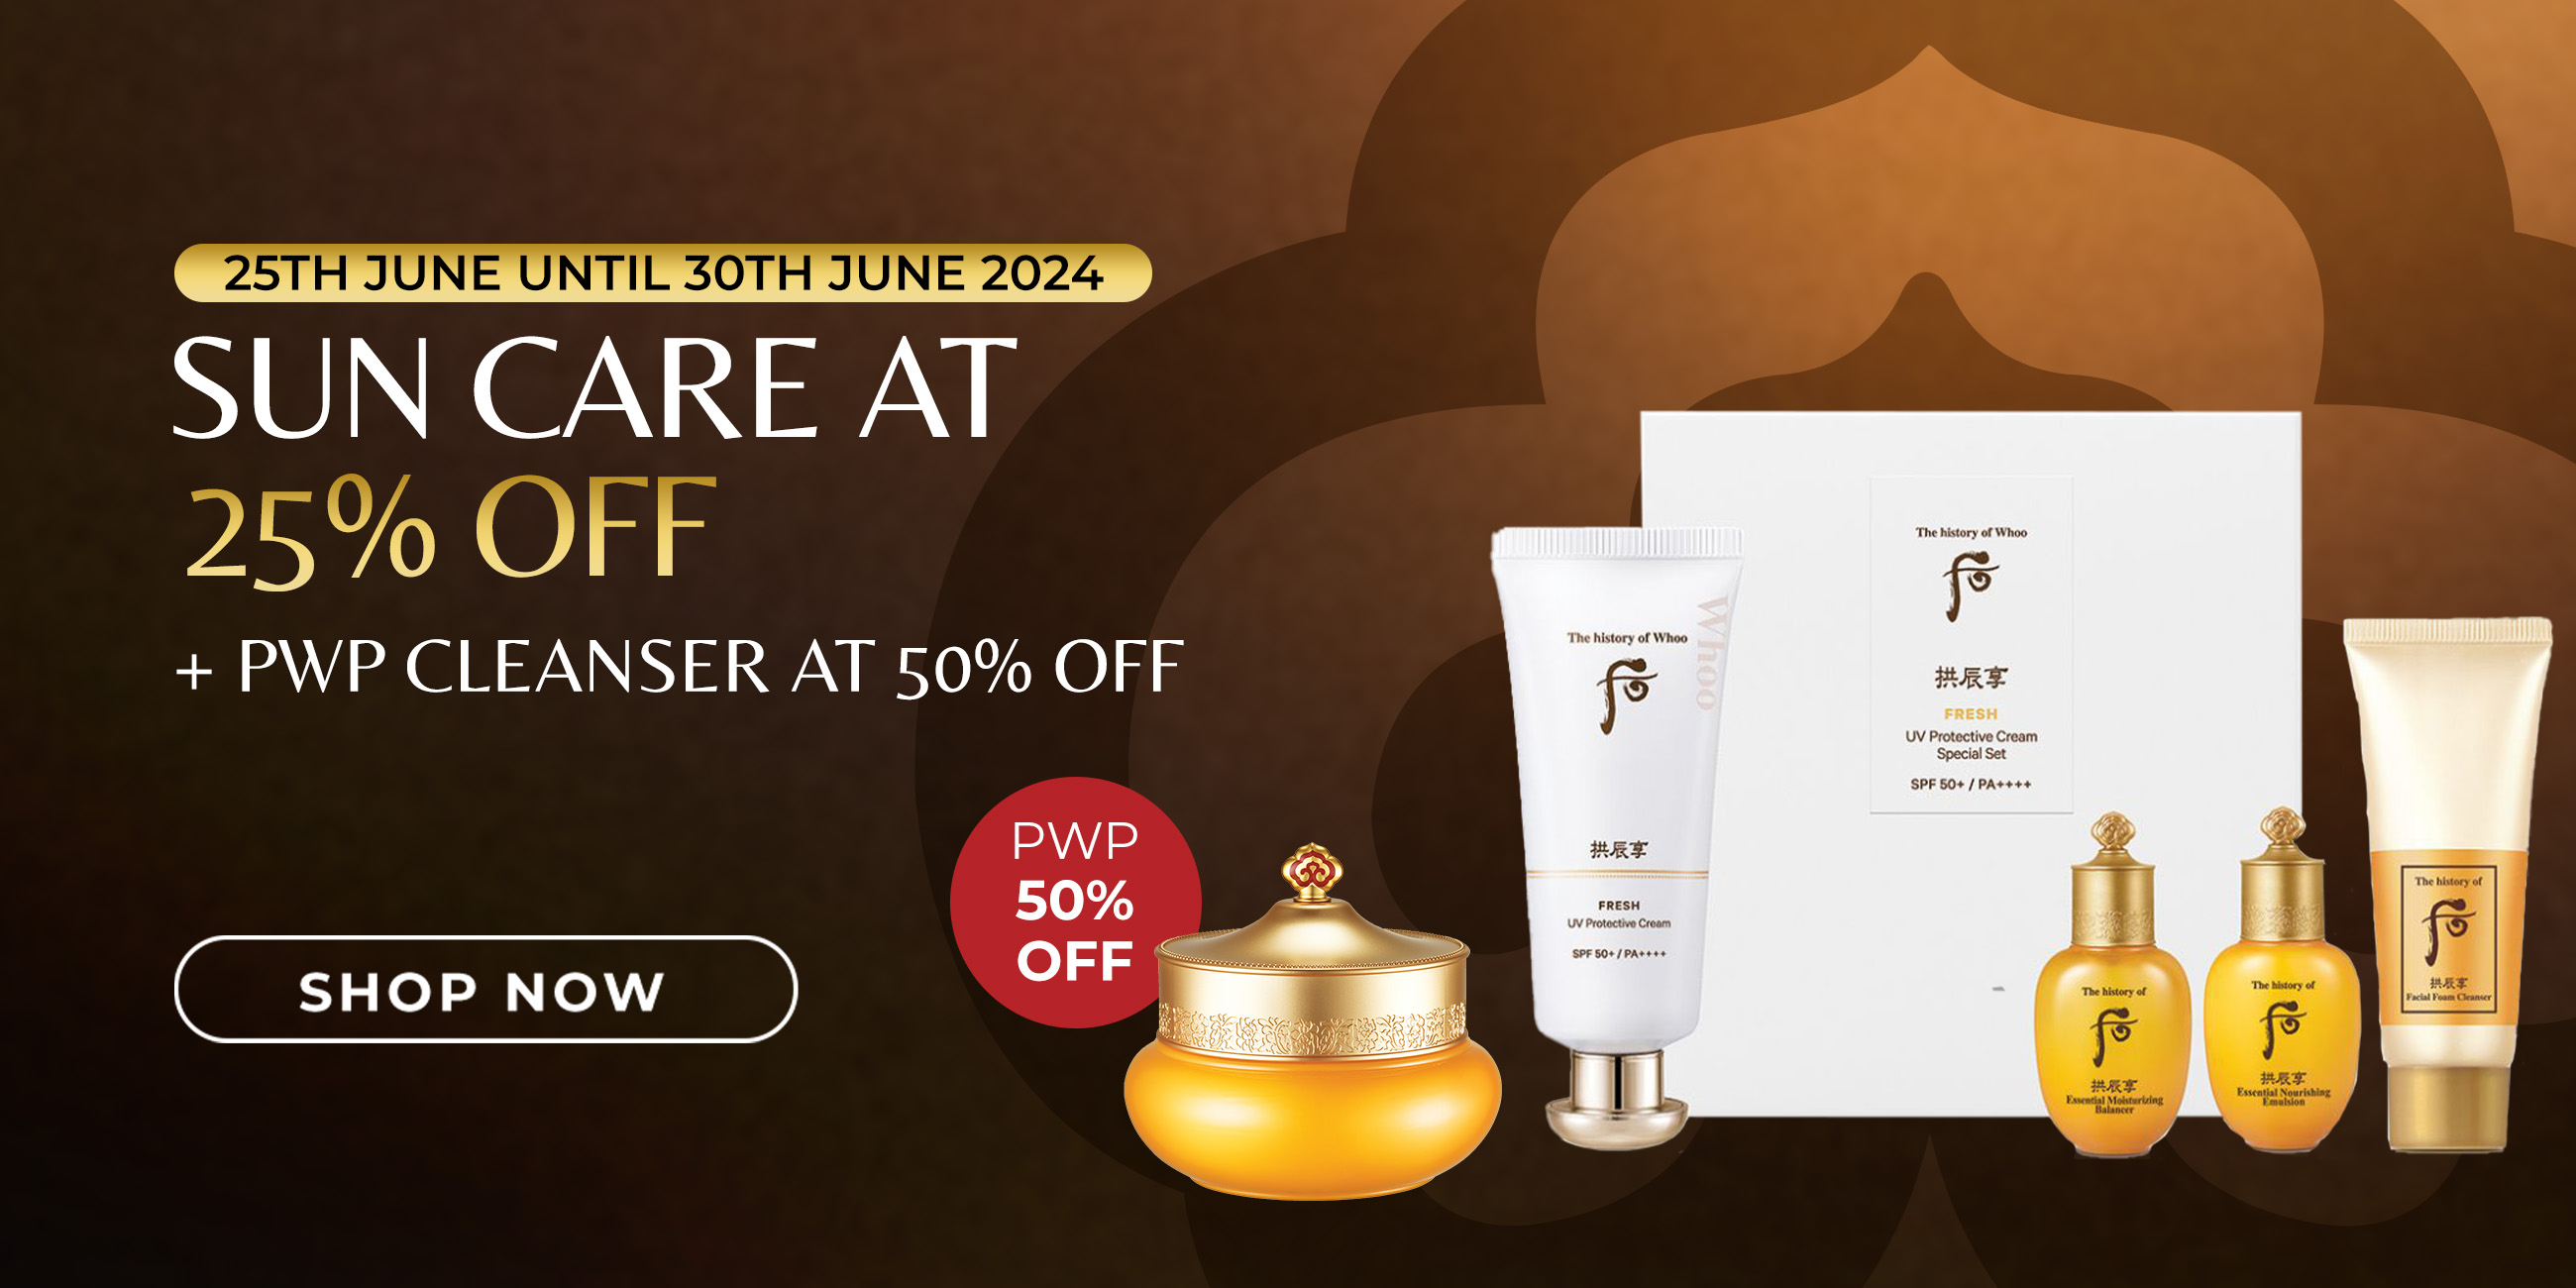 Buy Suncare at 25% Off + PWP Cleanser at 50% Off